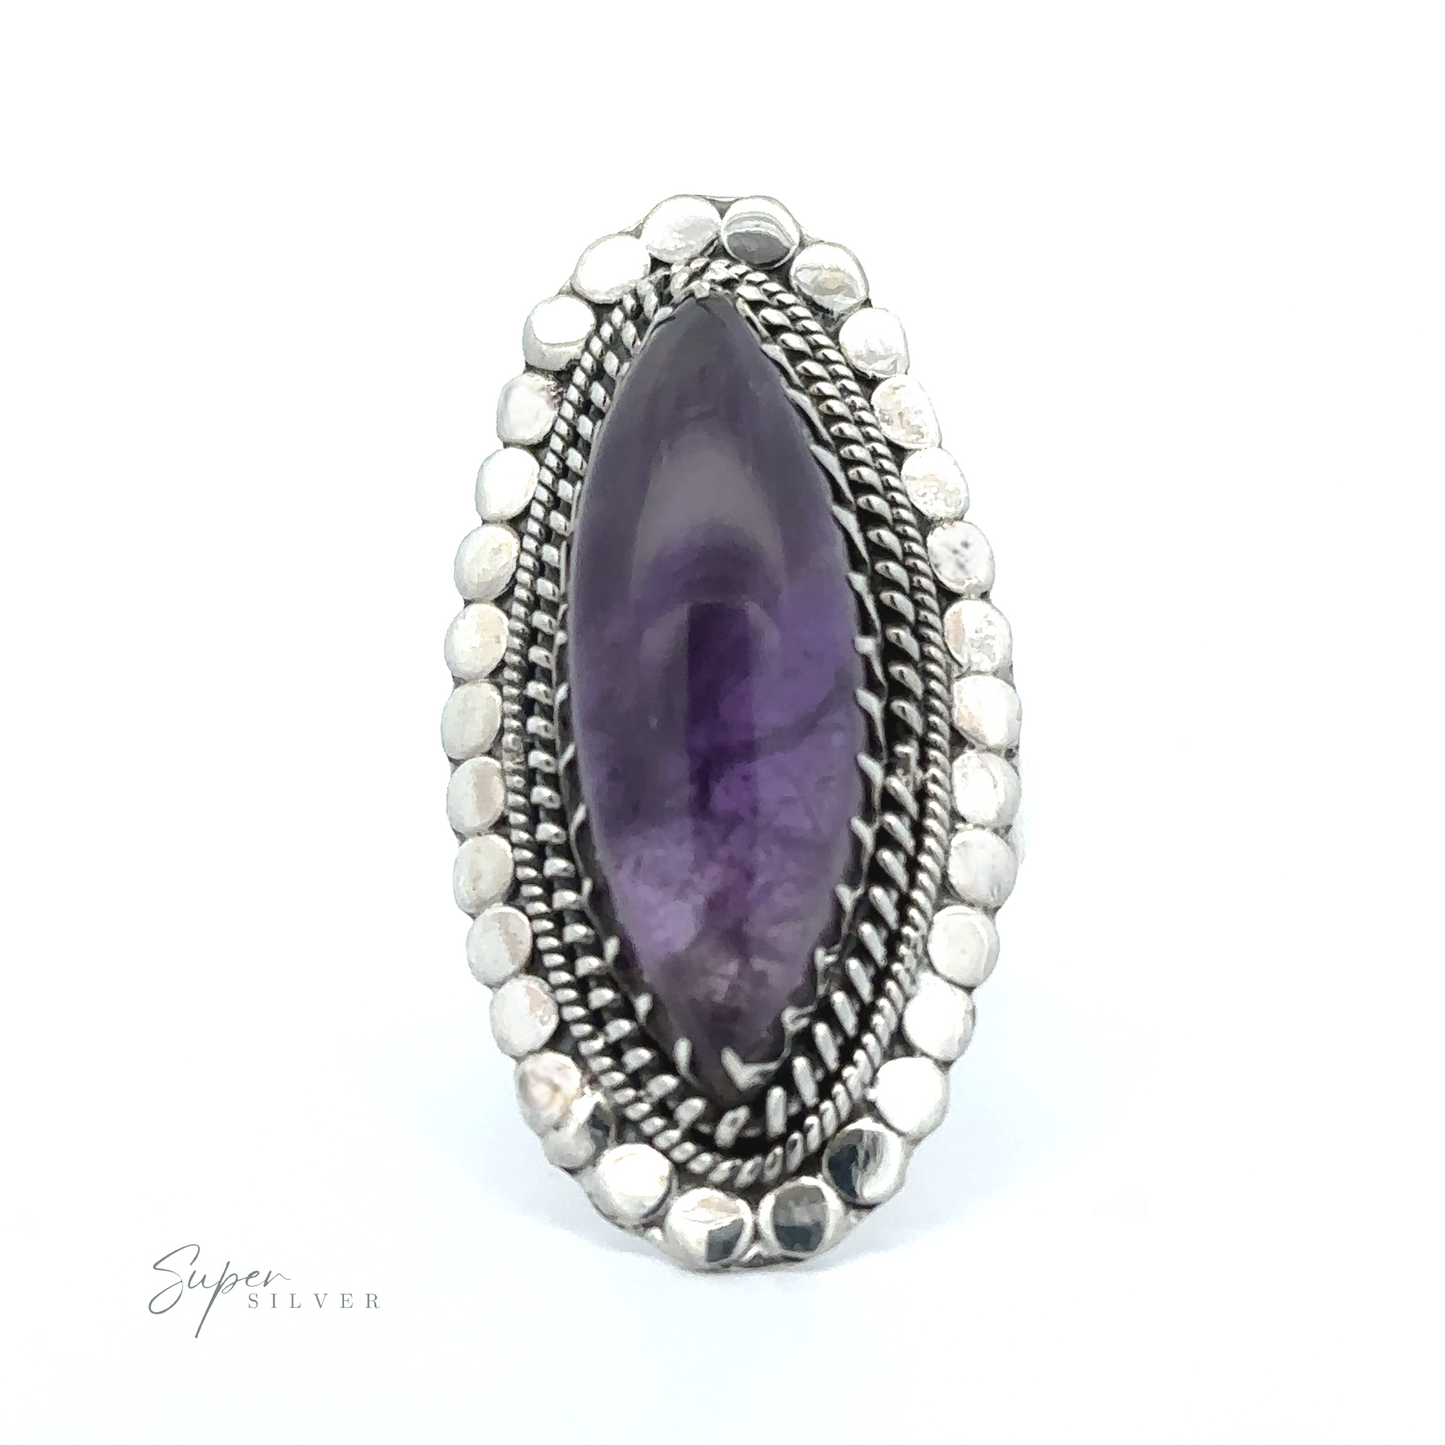 
                  
                    A silver ring with a large, elongated oval purple gemstone set in an intricately designed bezel, featuring rope detailing and a dotted border. Perfect for fans of Bohemian jewelry, it includes "Statement Marquise Shaped Gemstone Ring" text visible in the corner.
                  
                